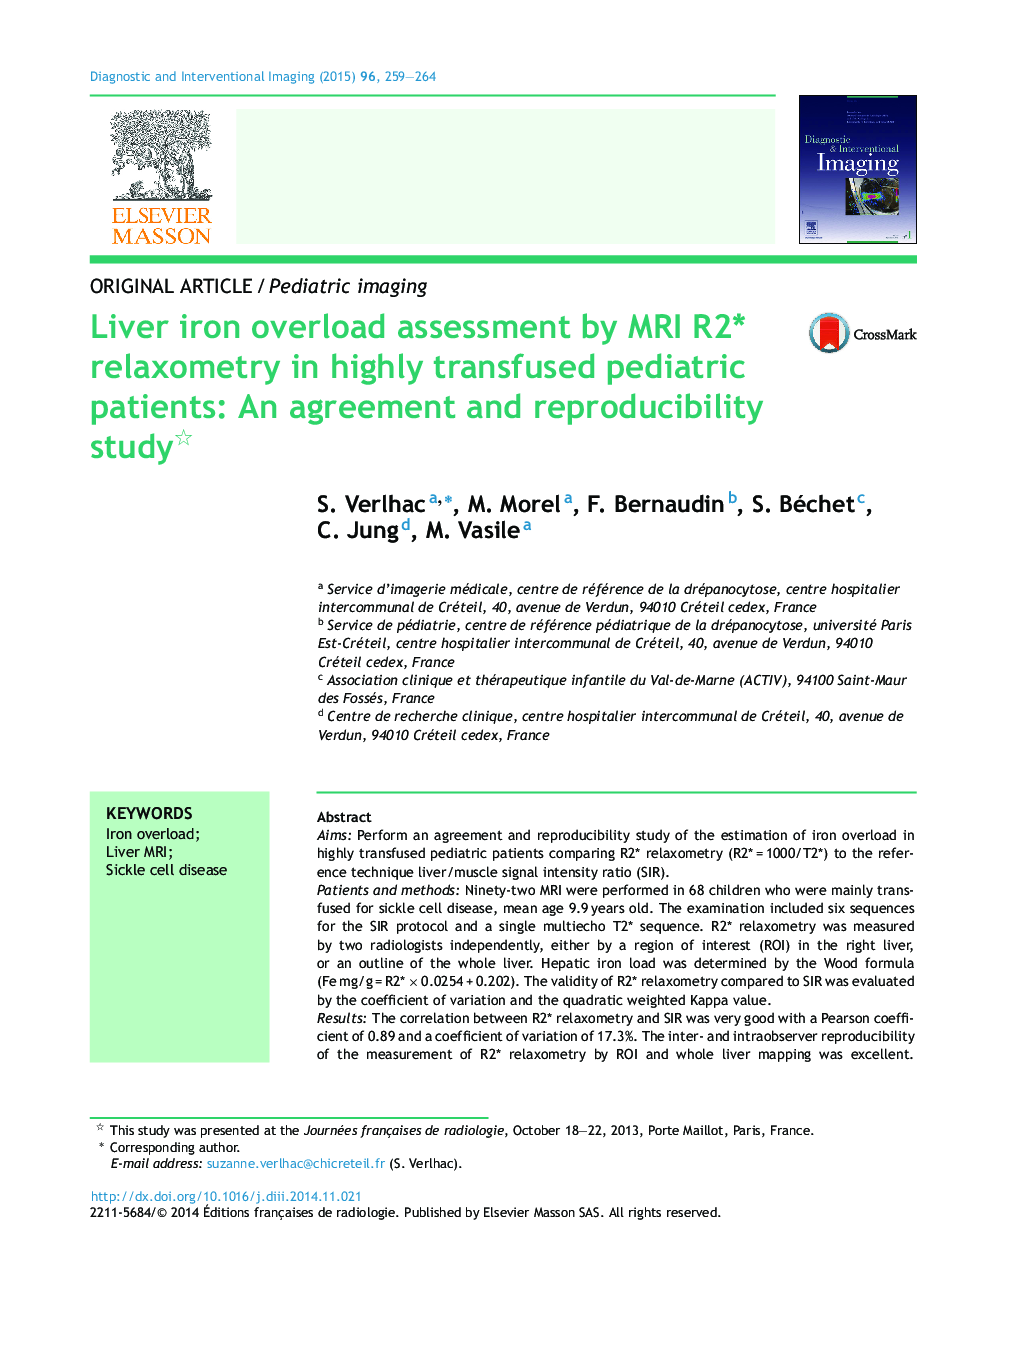 Liver iron overload assessment by MRI R2* relaxometry in highly transfused pediatric patients: An agreement and reproducibility study 